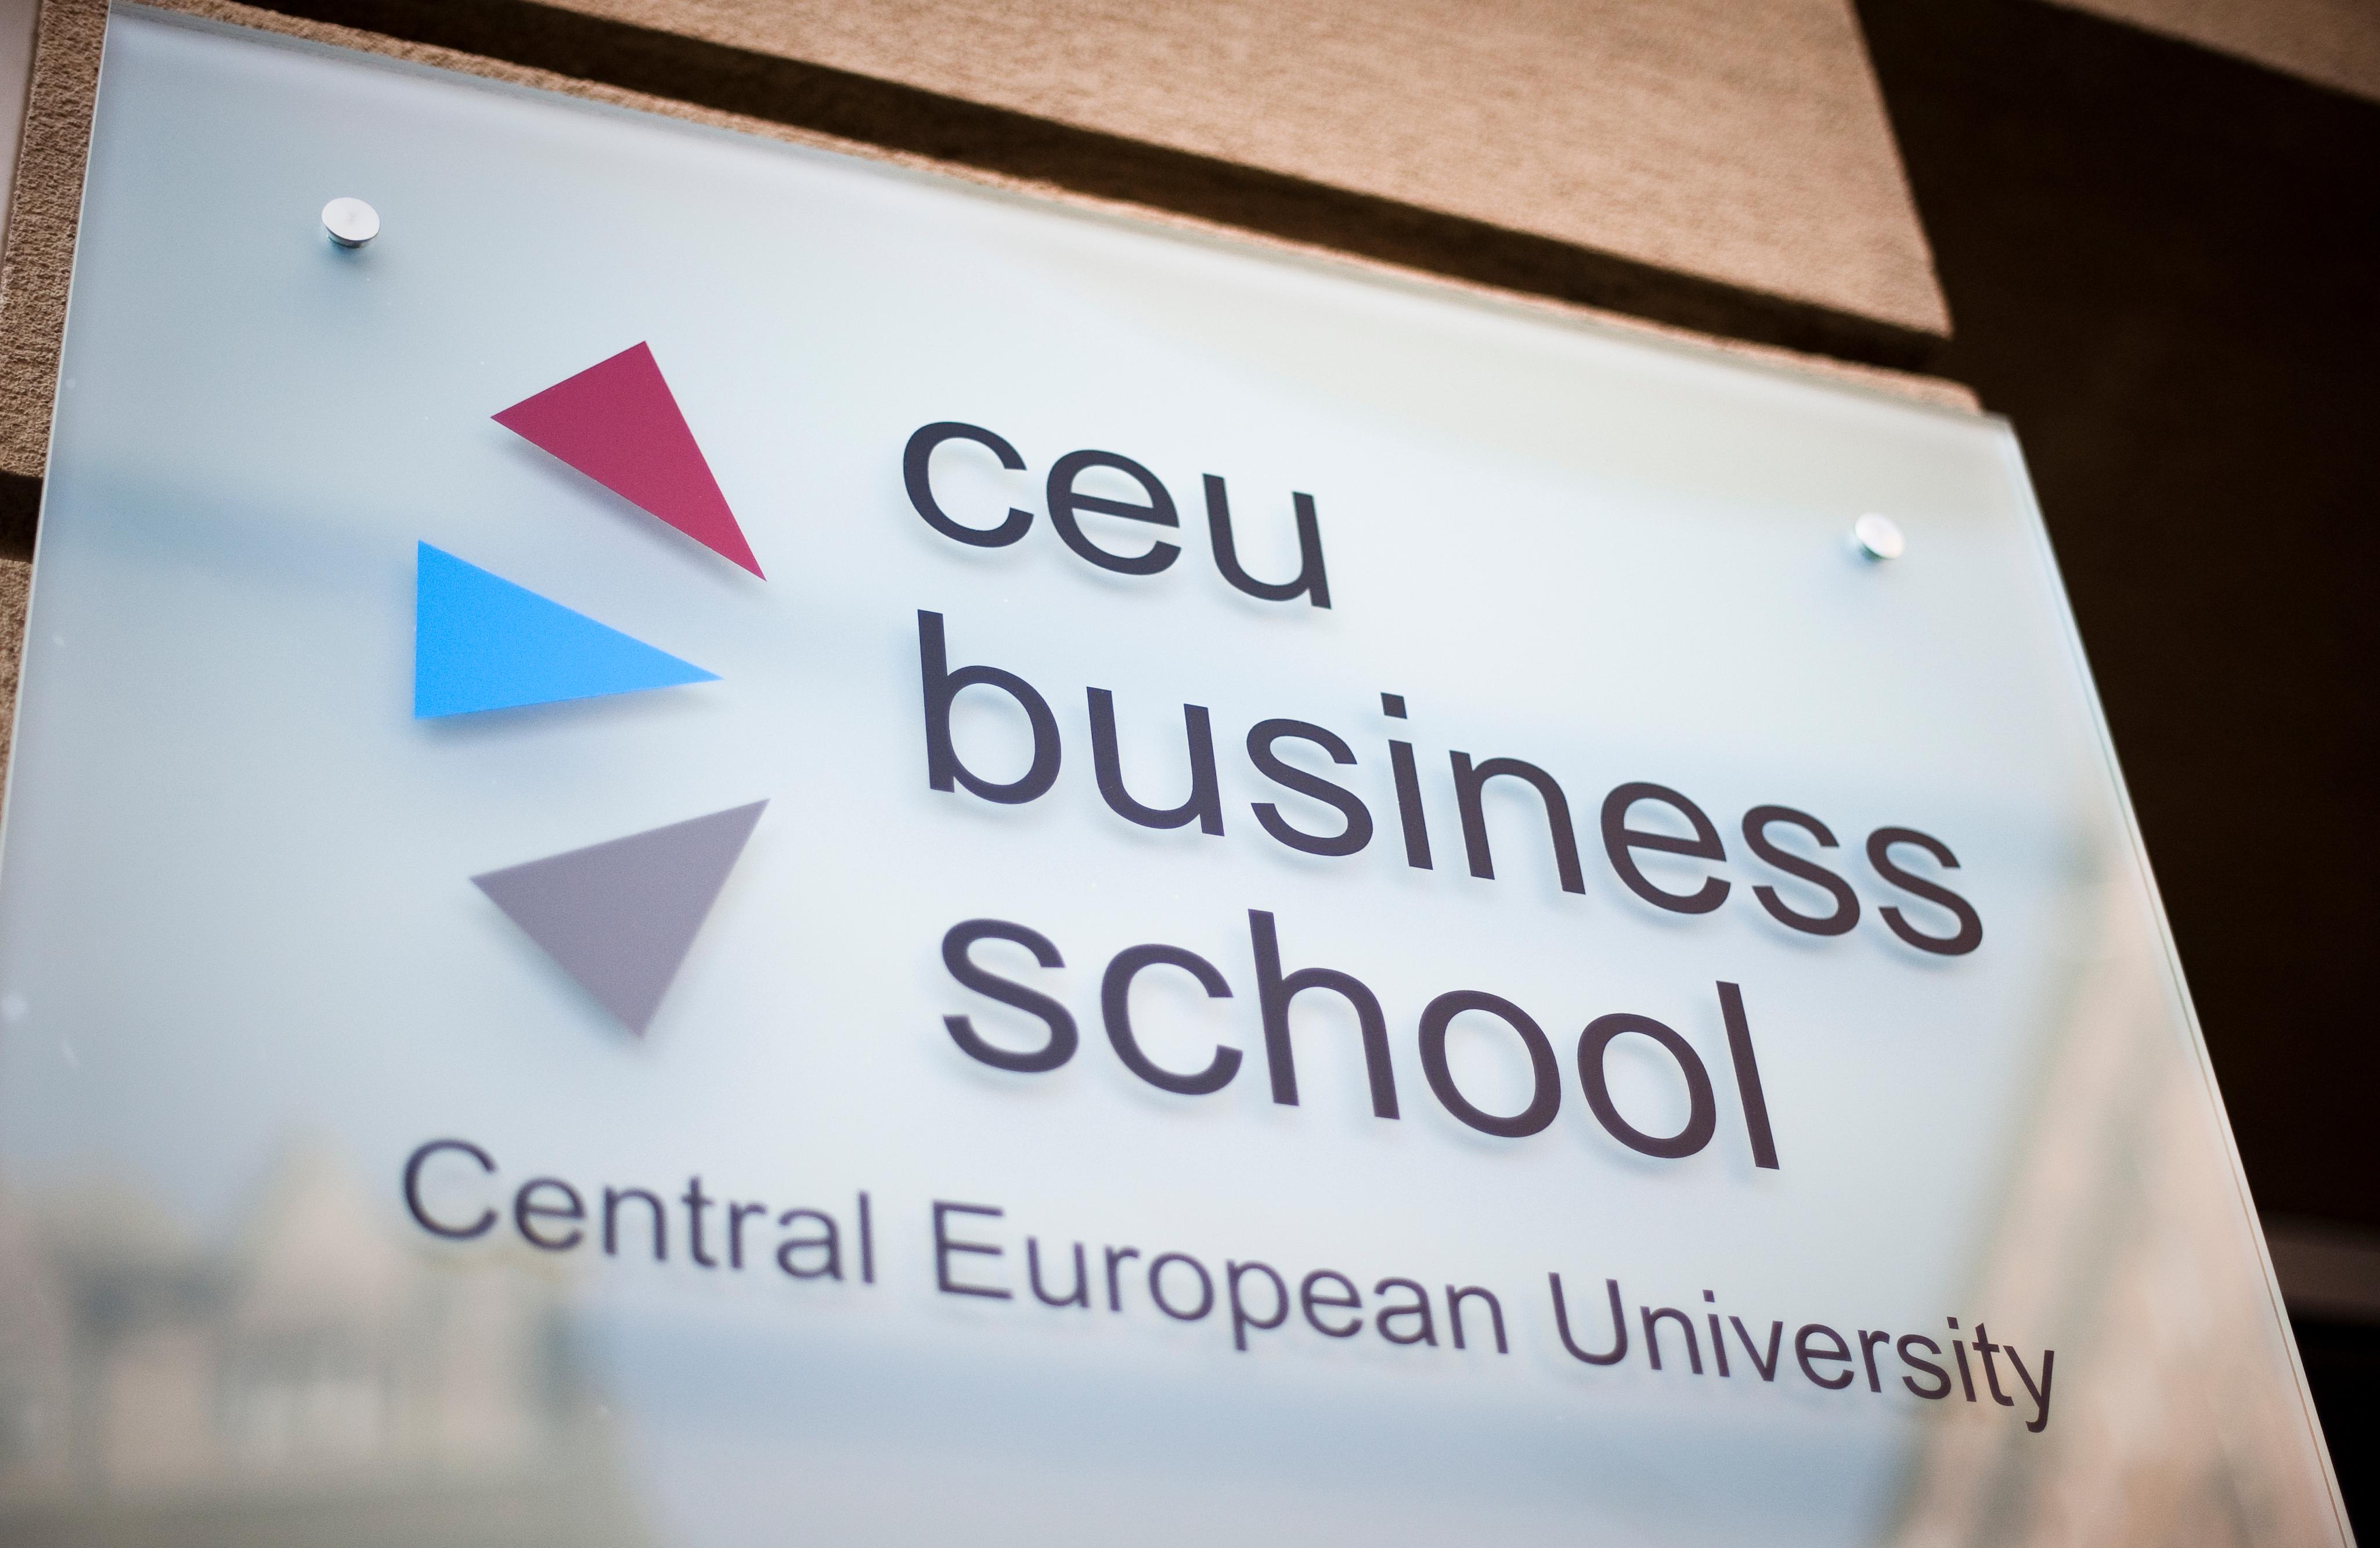 Lecture: 'The Euro Crisis & Eastern Europe', CEU Business School Budapest, 13 July